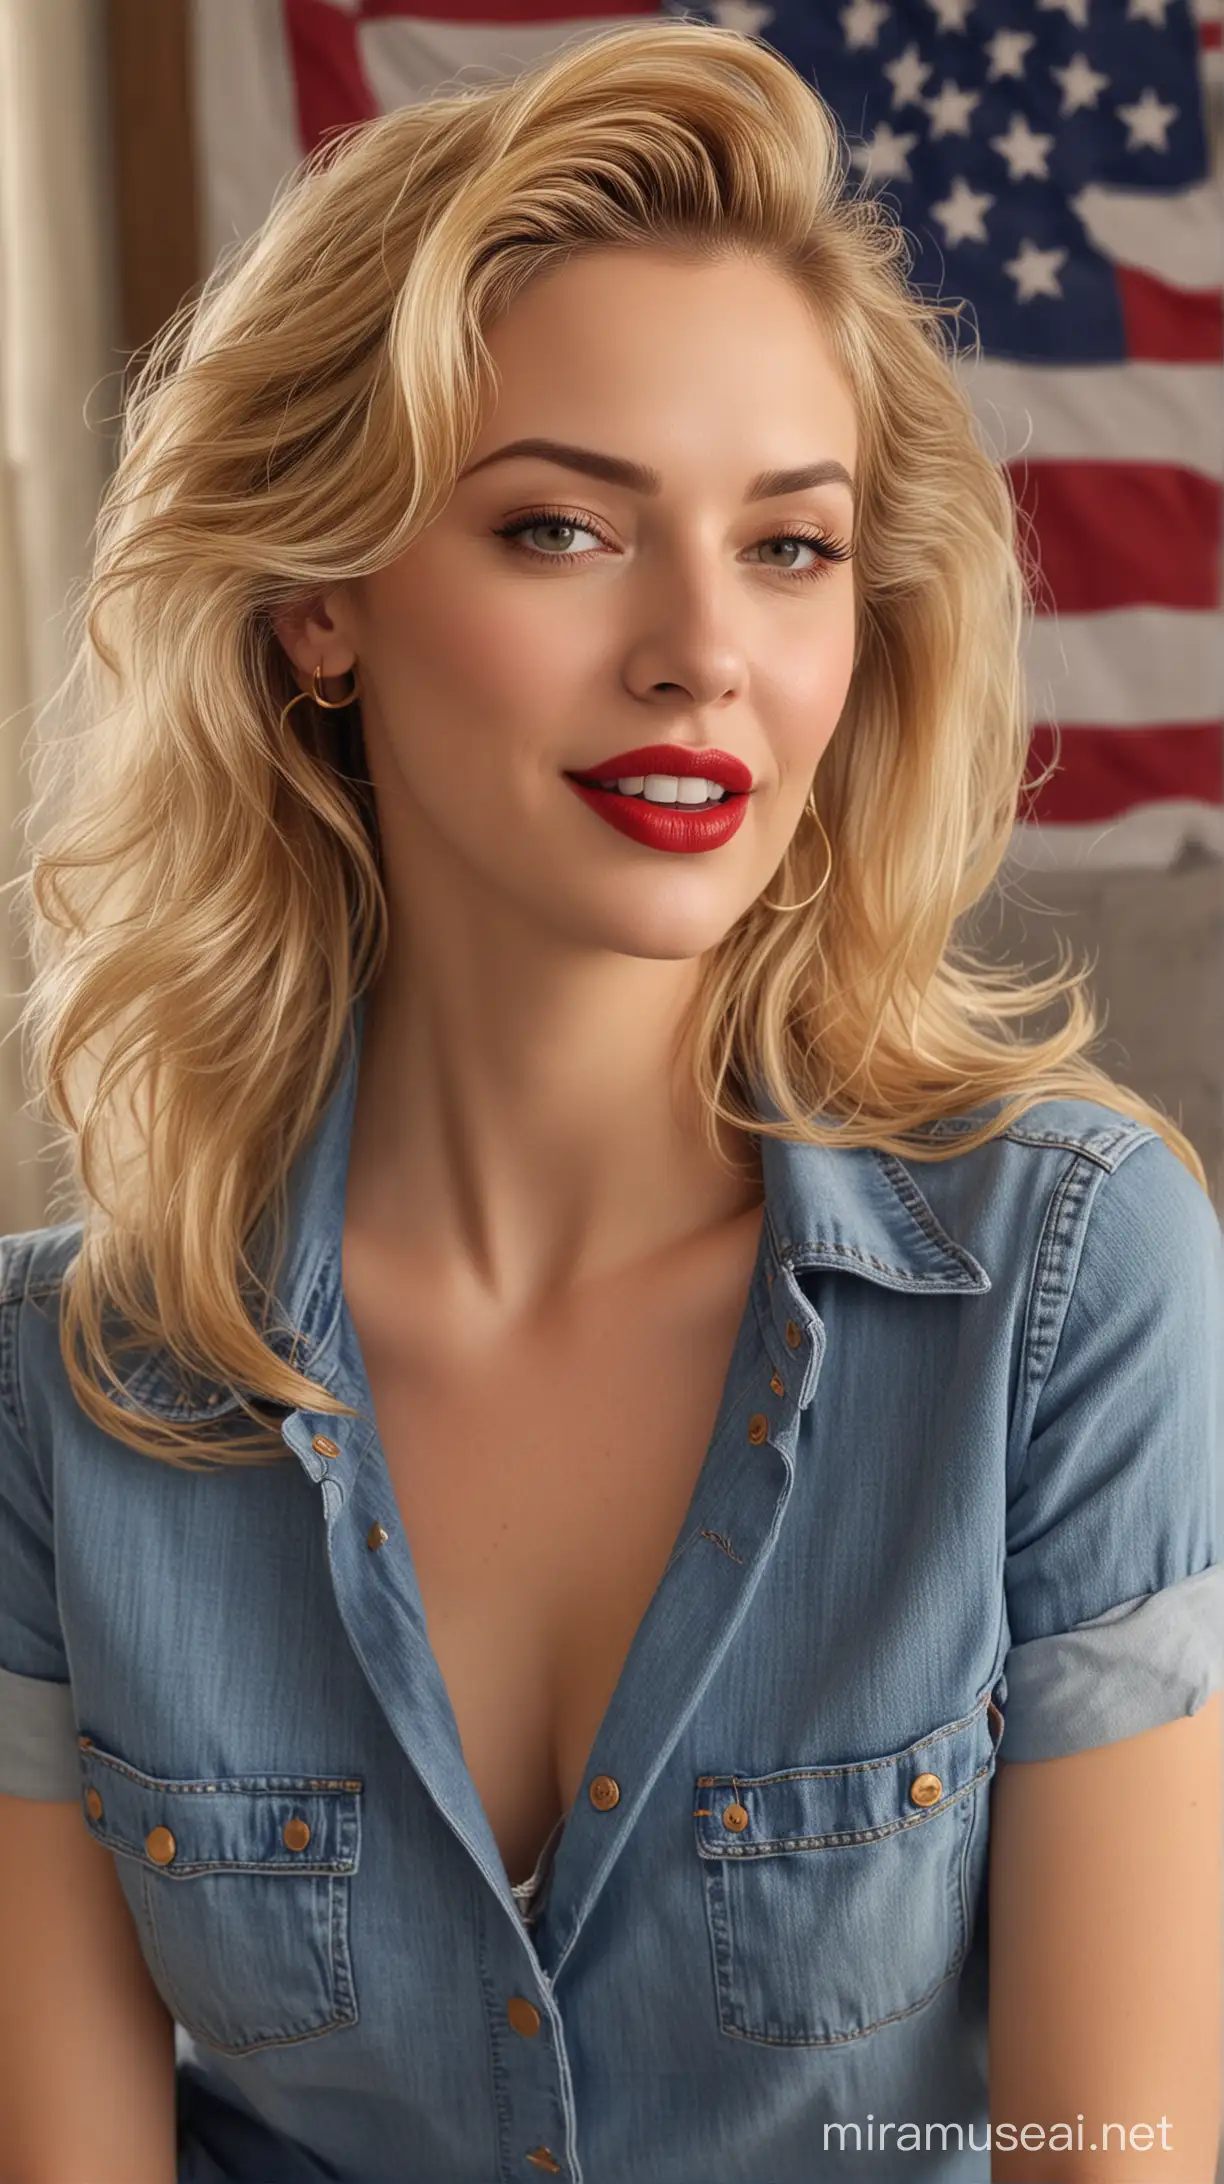 Beautiful USA Natural Old Lady with Golden Hair and Red Lipstick in Blue Jeans and Shirt